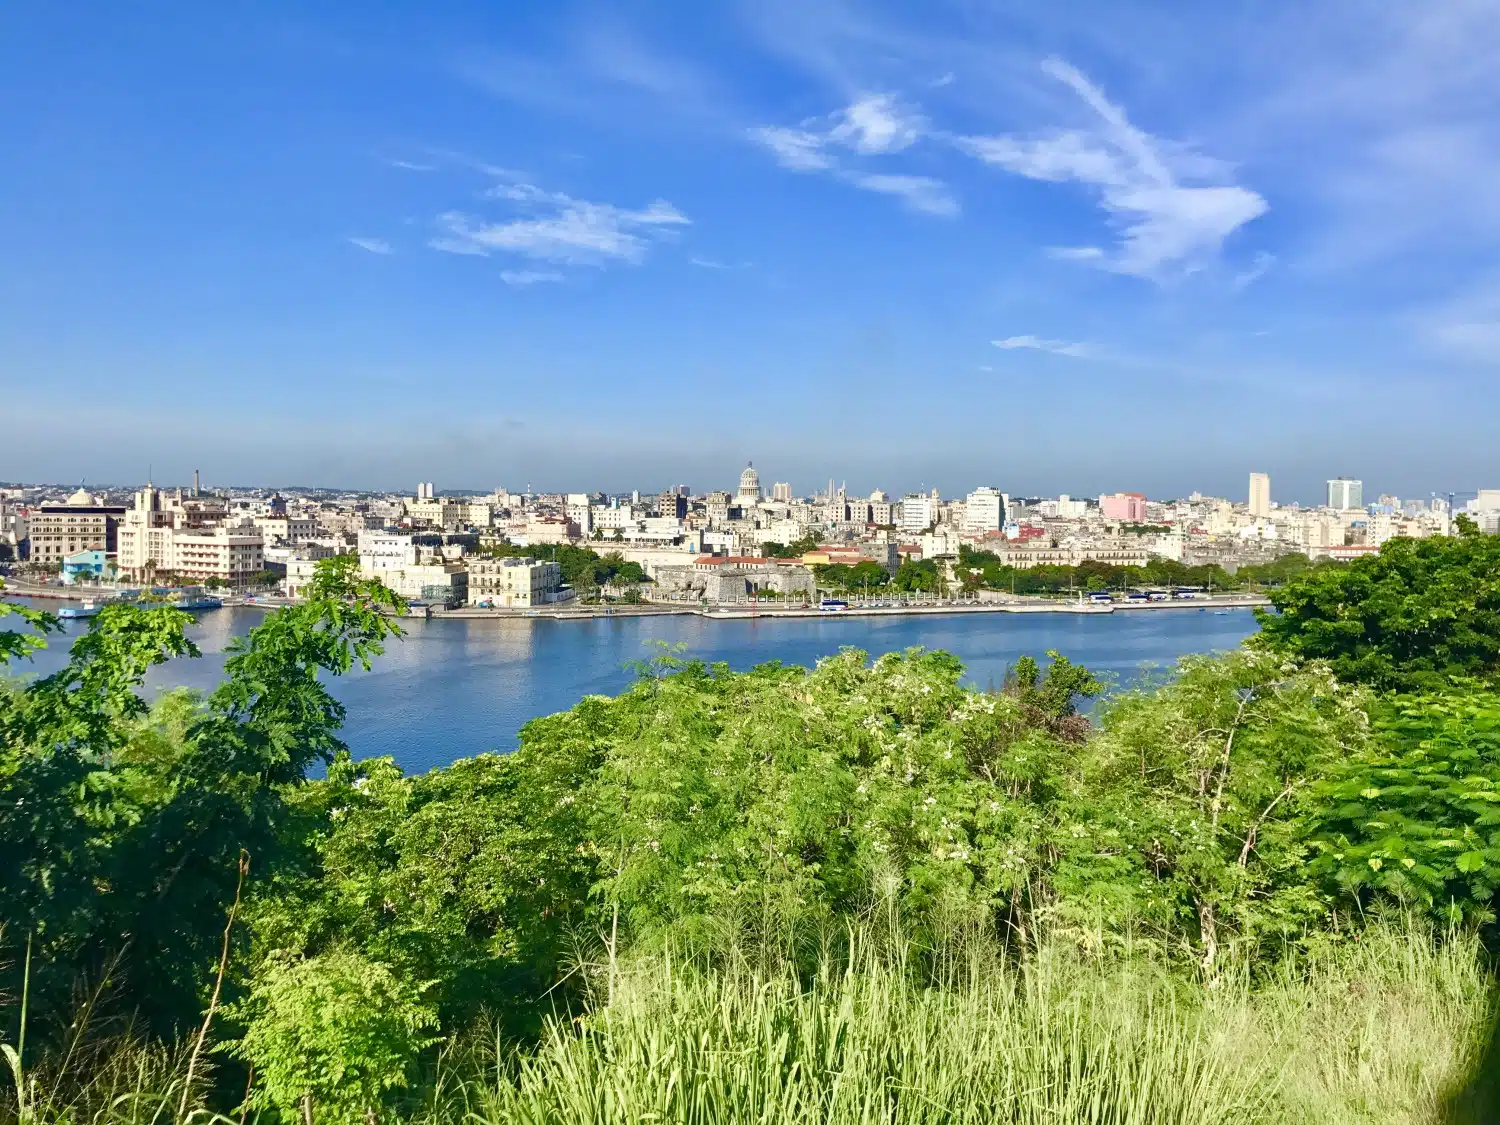 Here's where you need to go for the best views in Havana